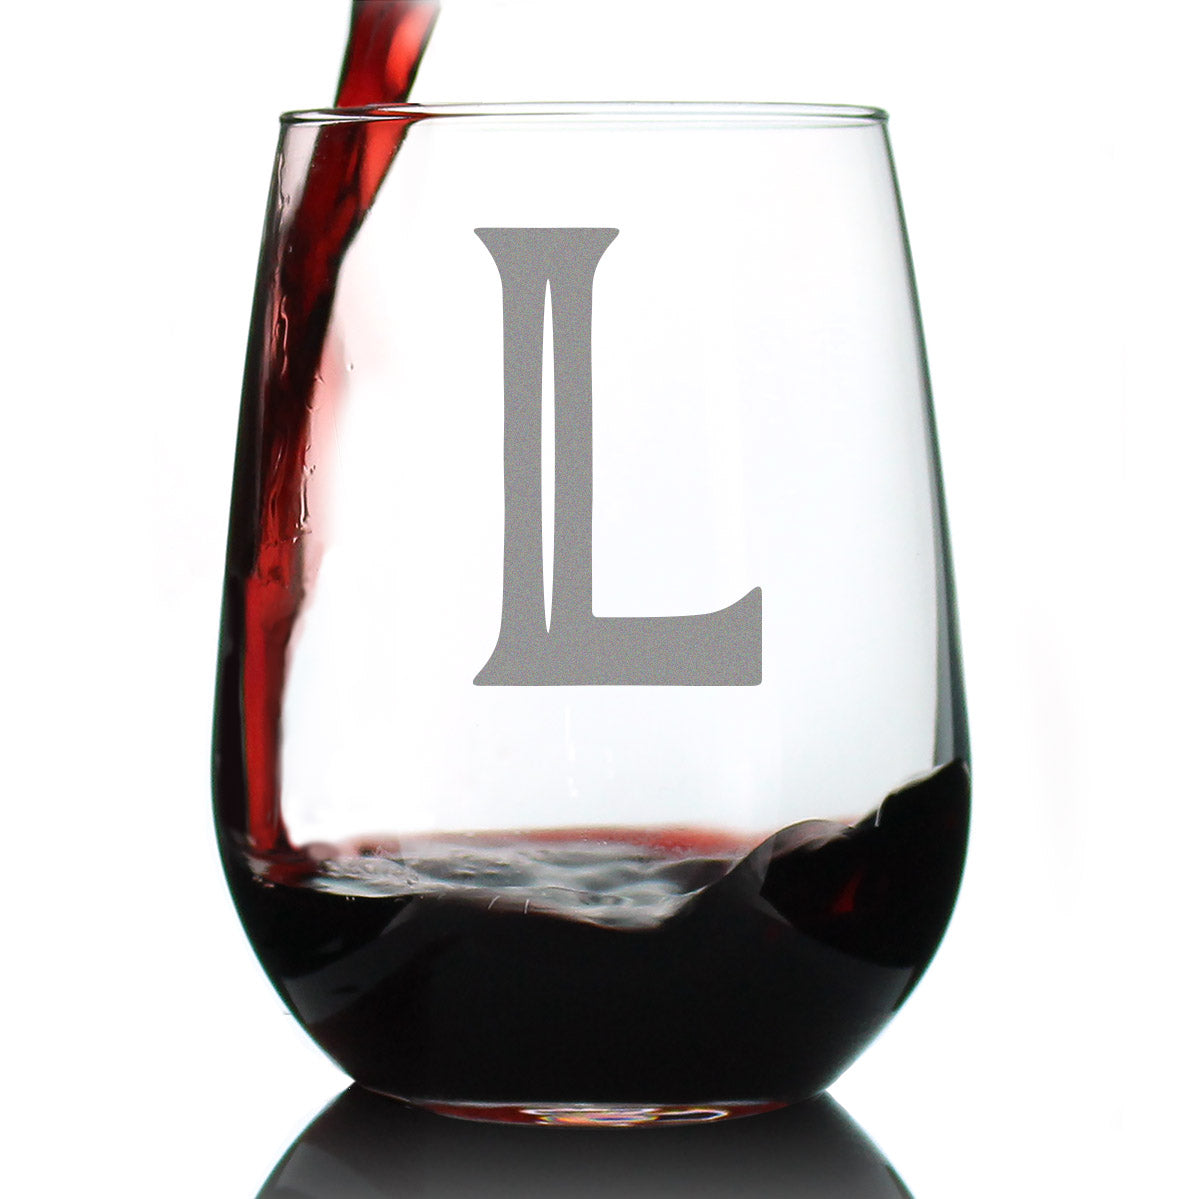 Monogram Bold Letter L - Stemless Wine Glass - Personalized Gifts for Women and Men - Large Engraved Glasses